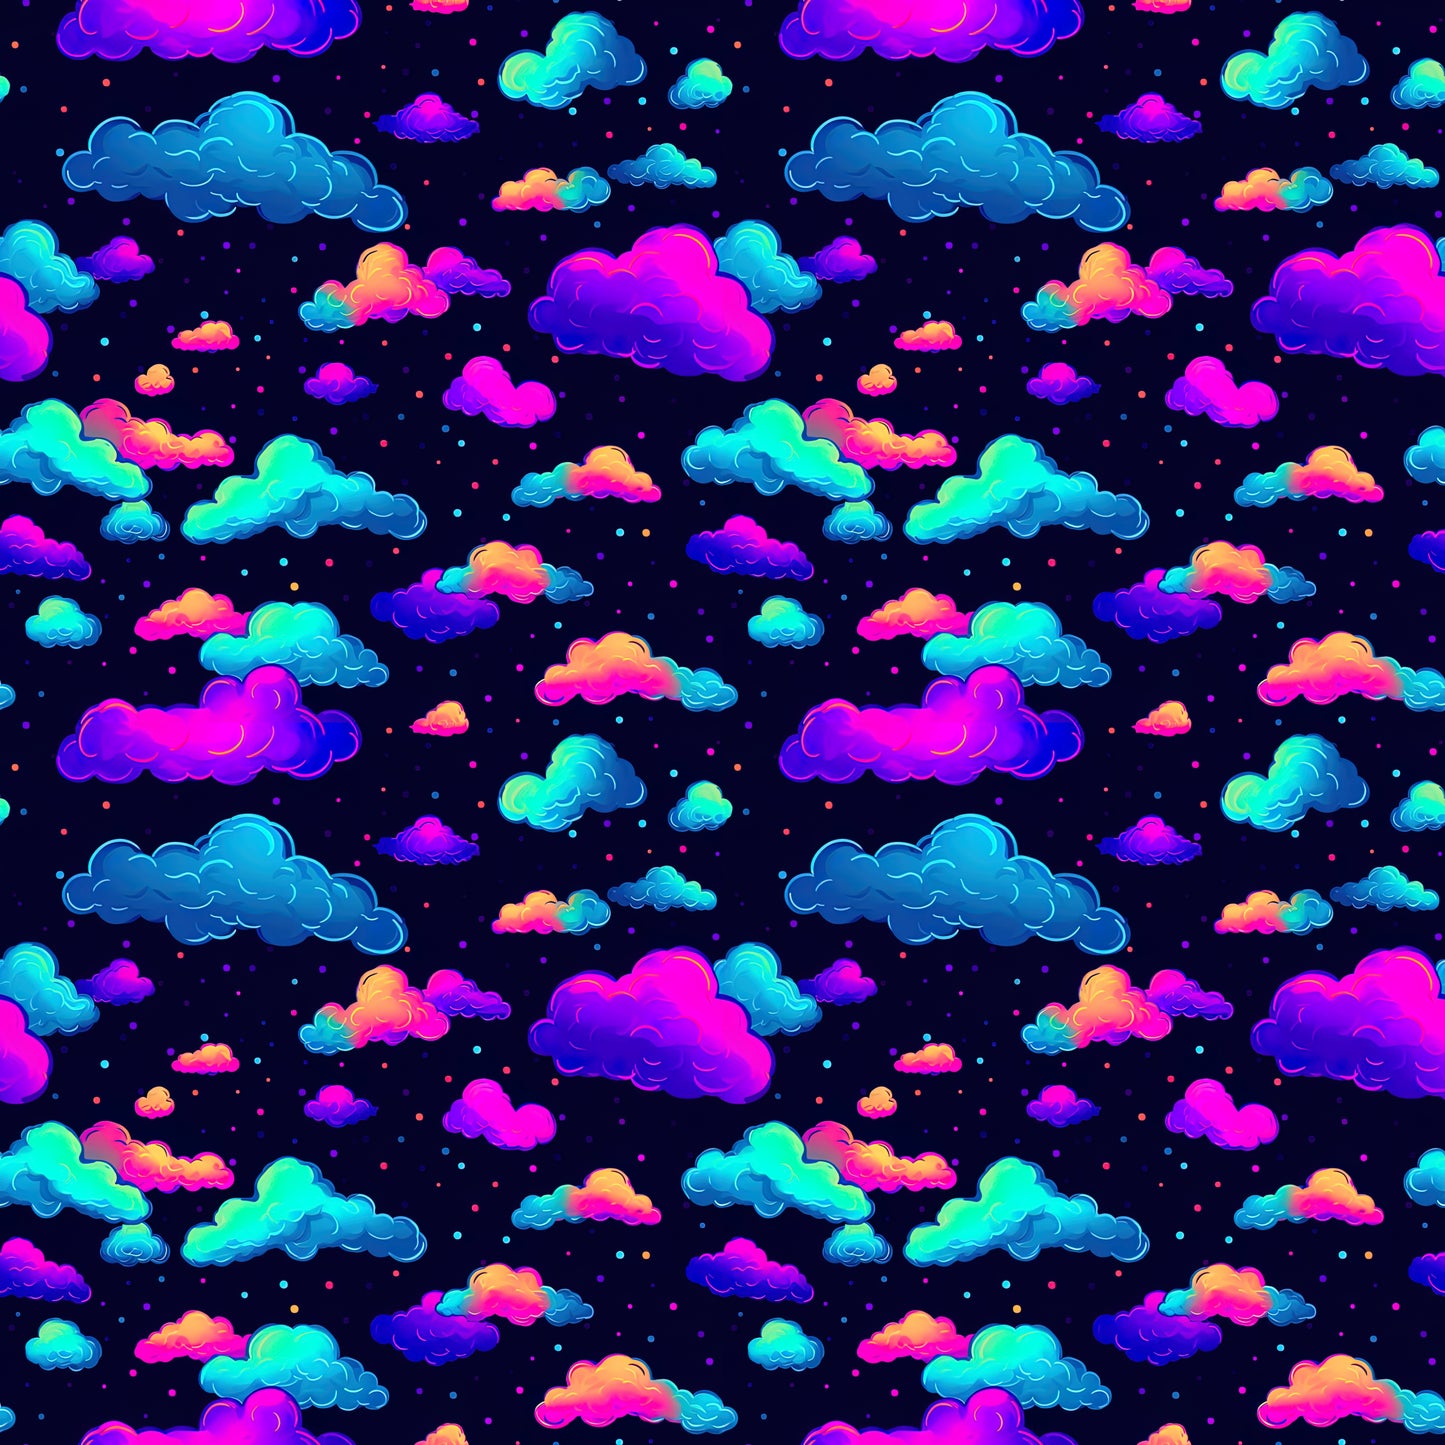 NEON CLOUDS